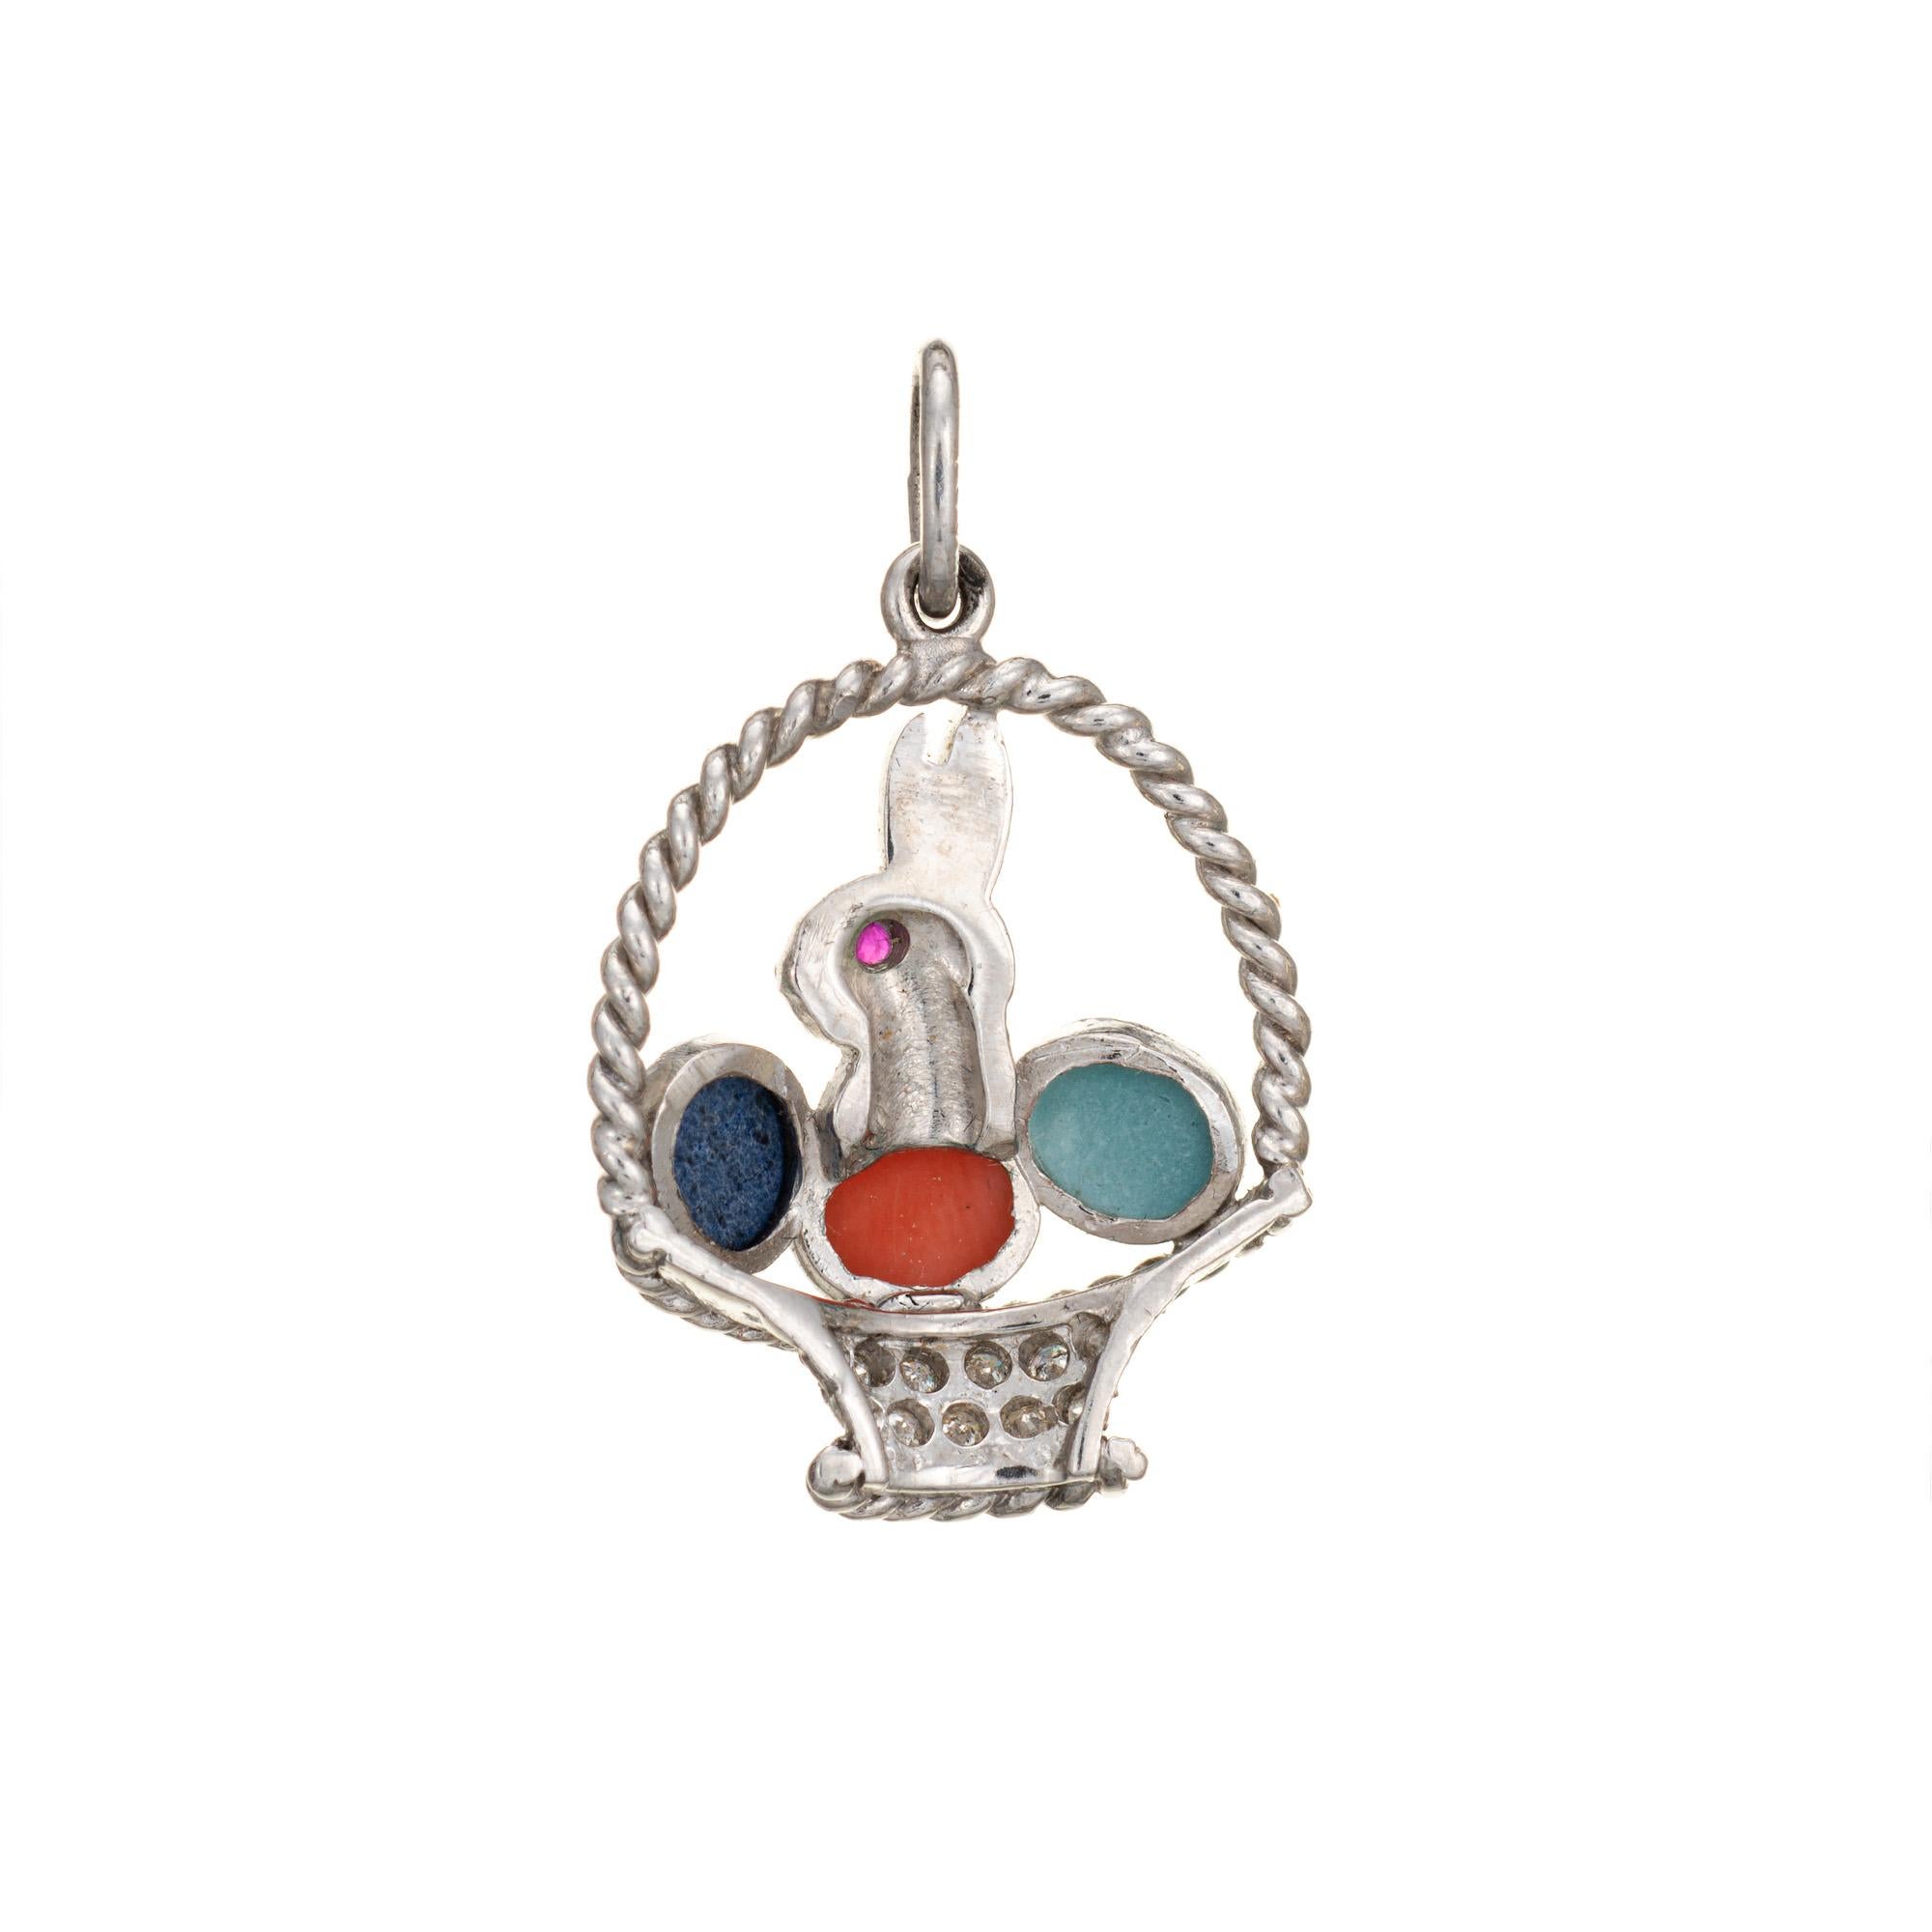 Finely detailed vintage Art Deco era charm crafted in 900 platinum (circa 1920s to 1930s).  

Lapis, coral and turquoise are set into the charm (4mm x 3mm). One estimated 0.01 carat ruby is set into the eye. 11 diamonds total an estimated 0.05